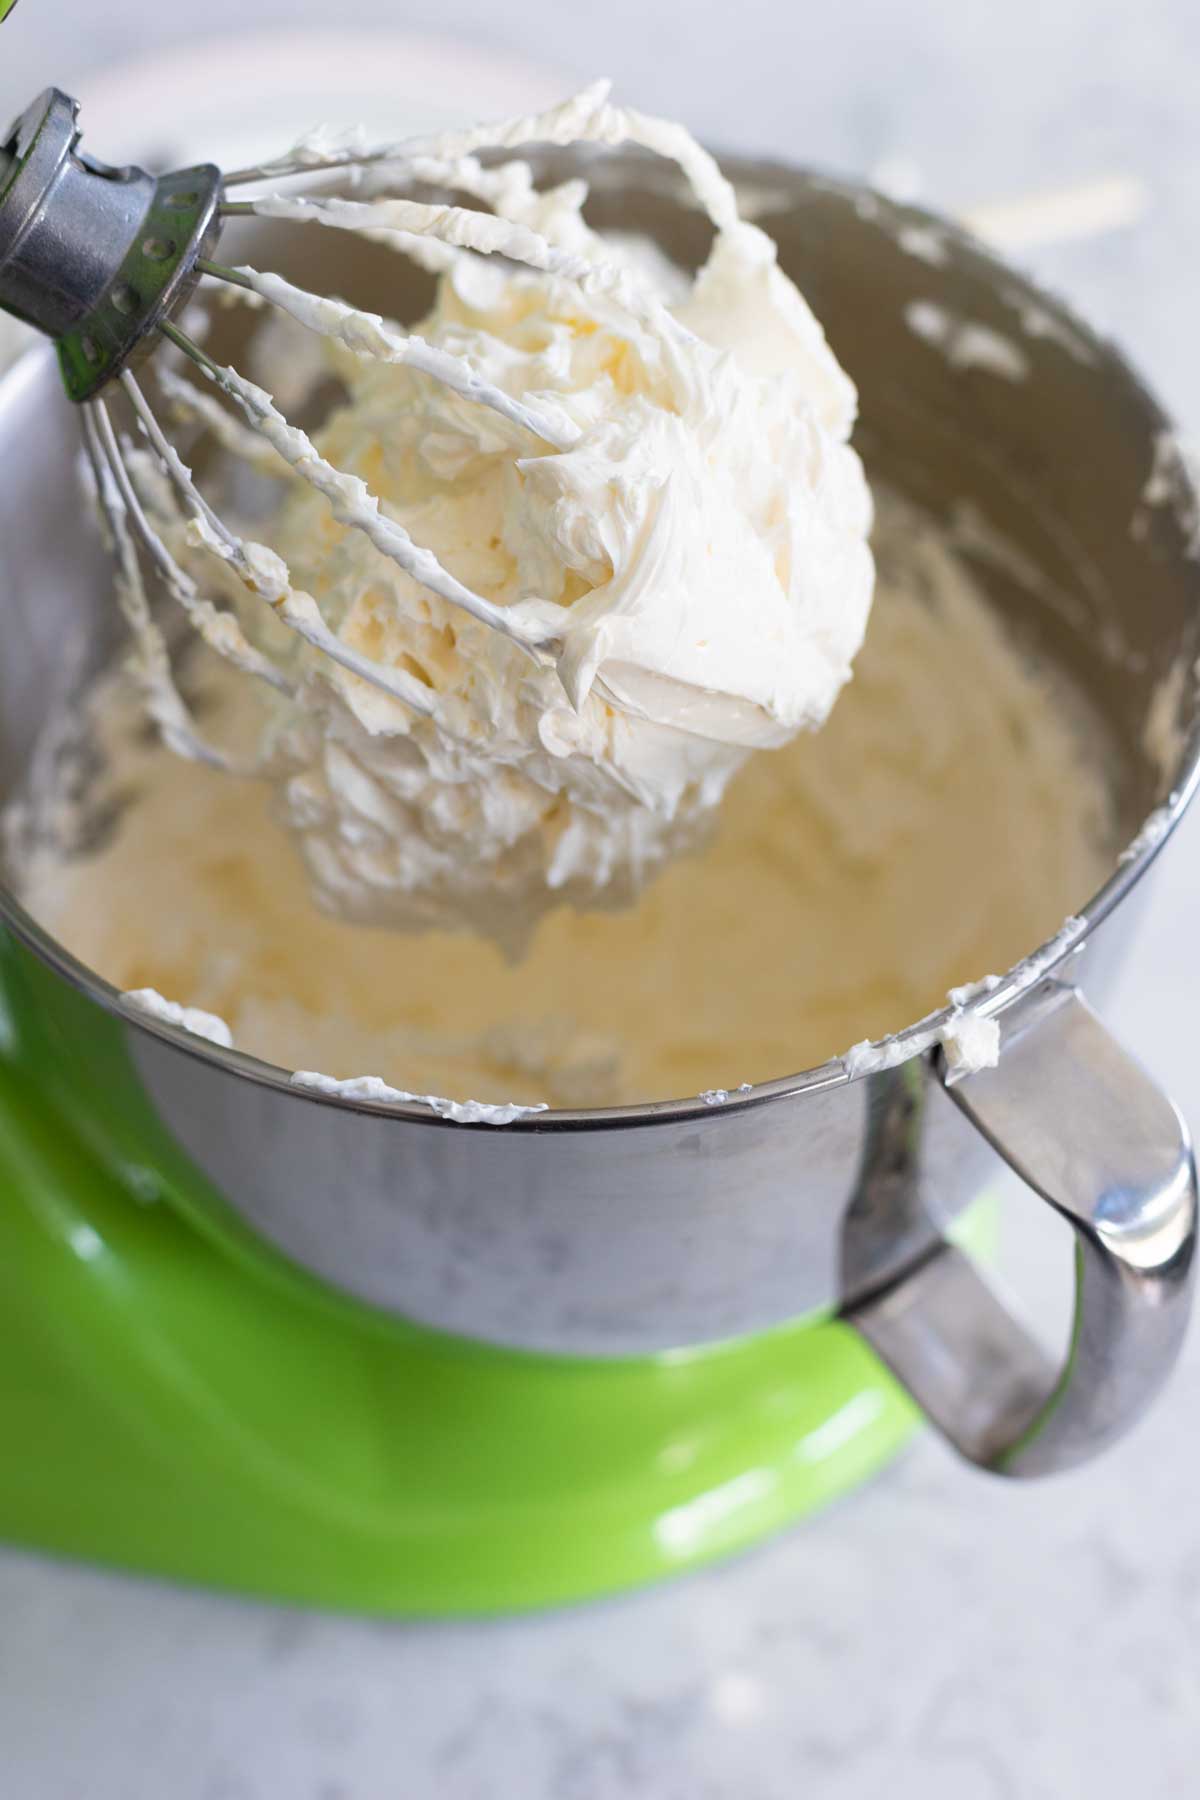 The frosting is clinging to the mixer whisk.